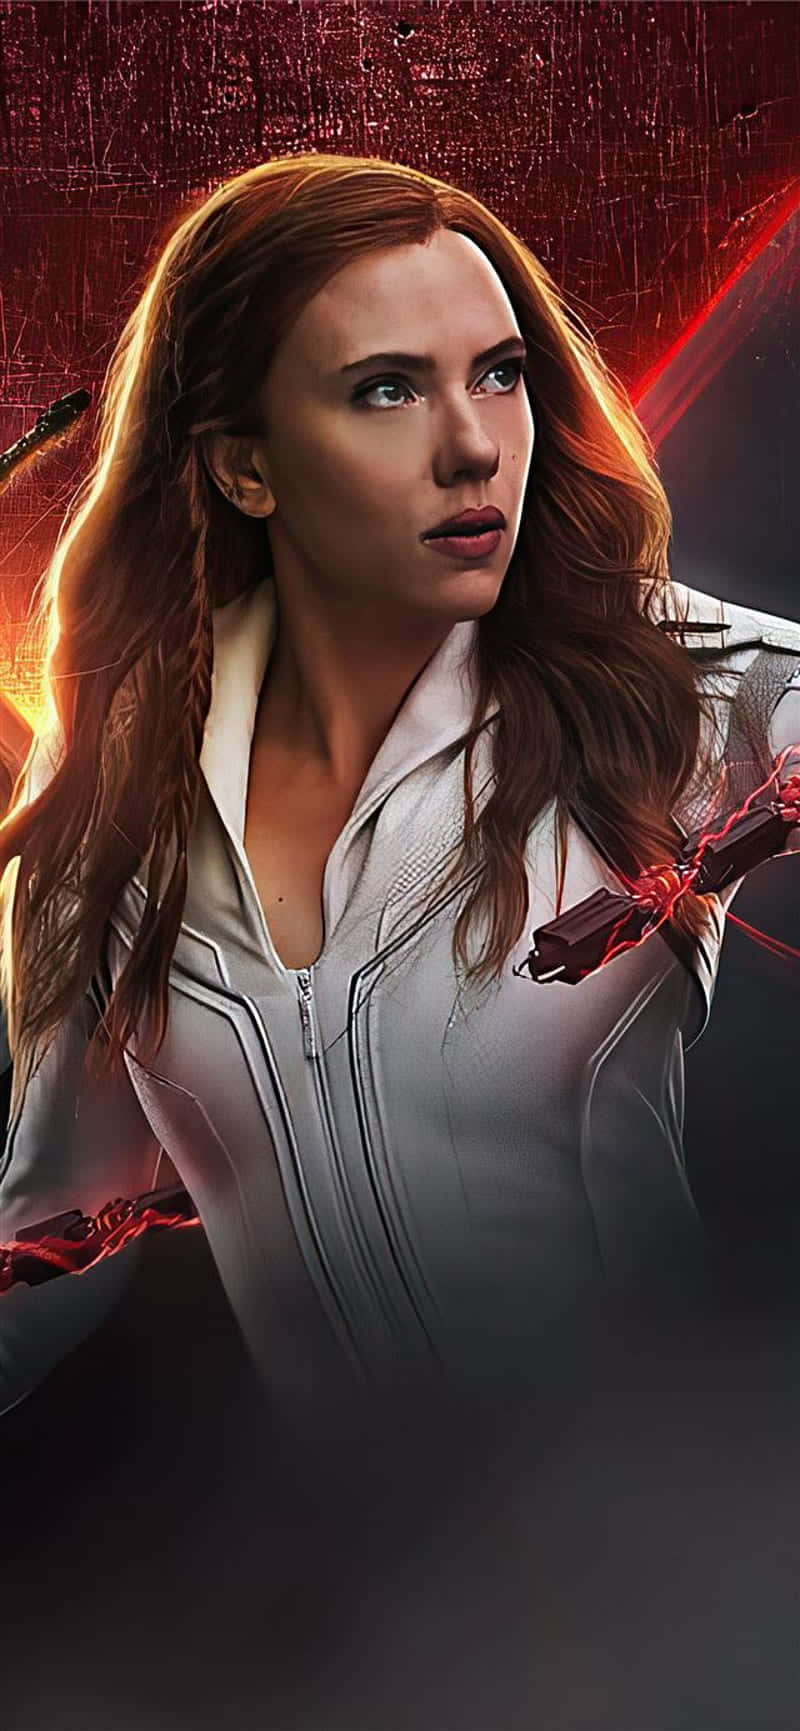 Keep updated with the latest Black Widow news on your iPhone Wallpaper